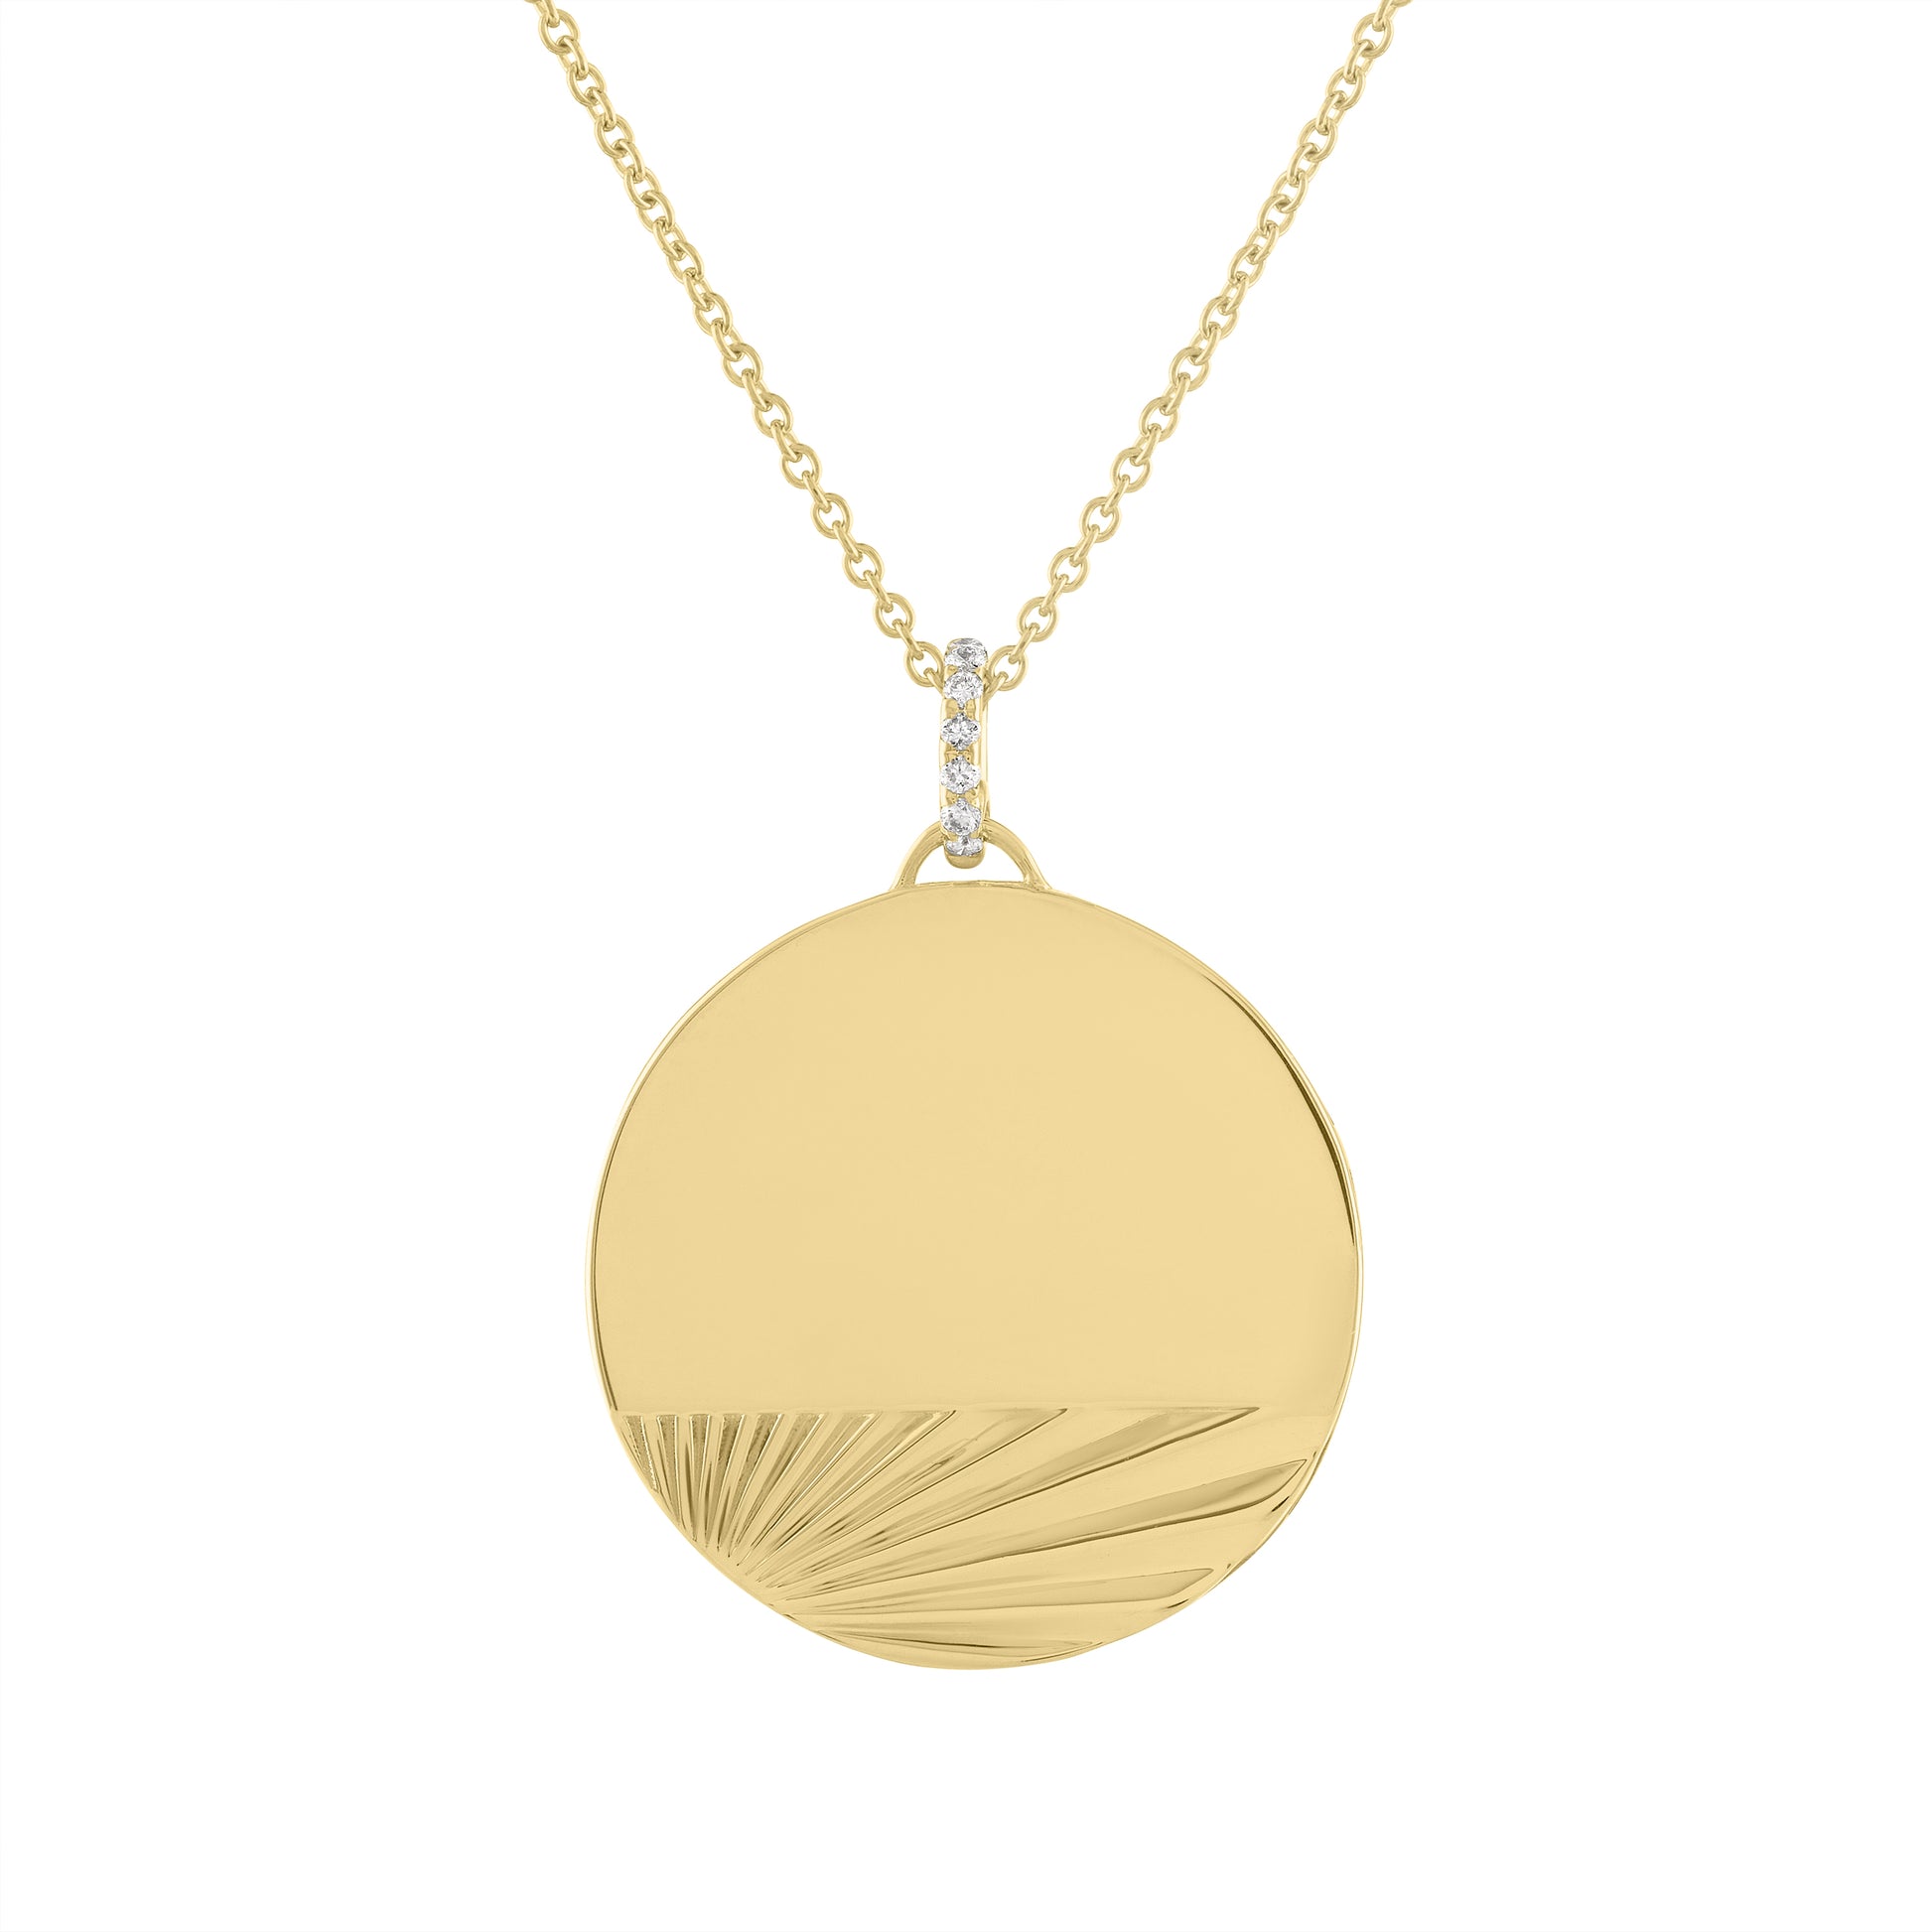 Yellow gold engravable disc necklace with fluting and a diamond bail. 